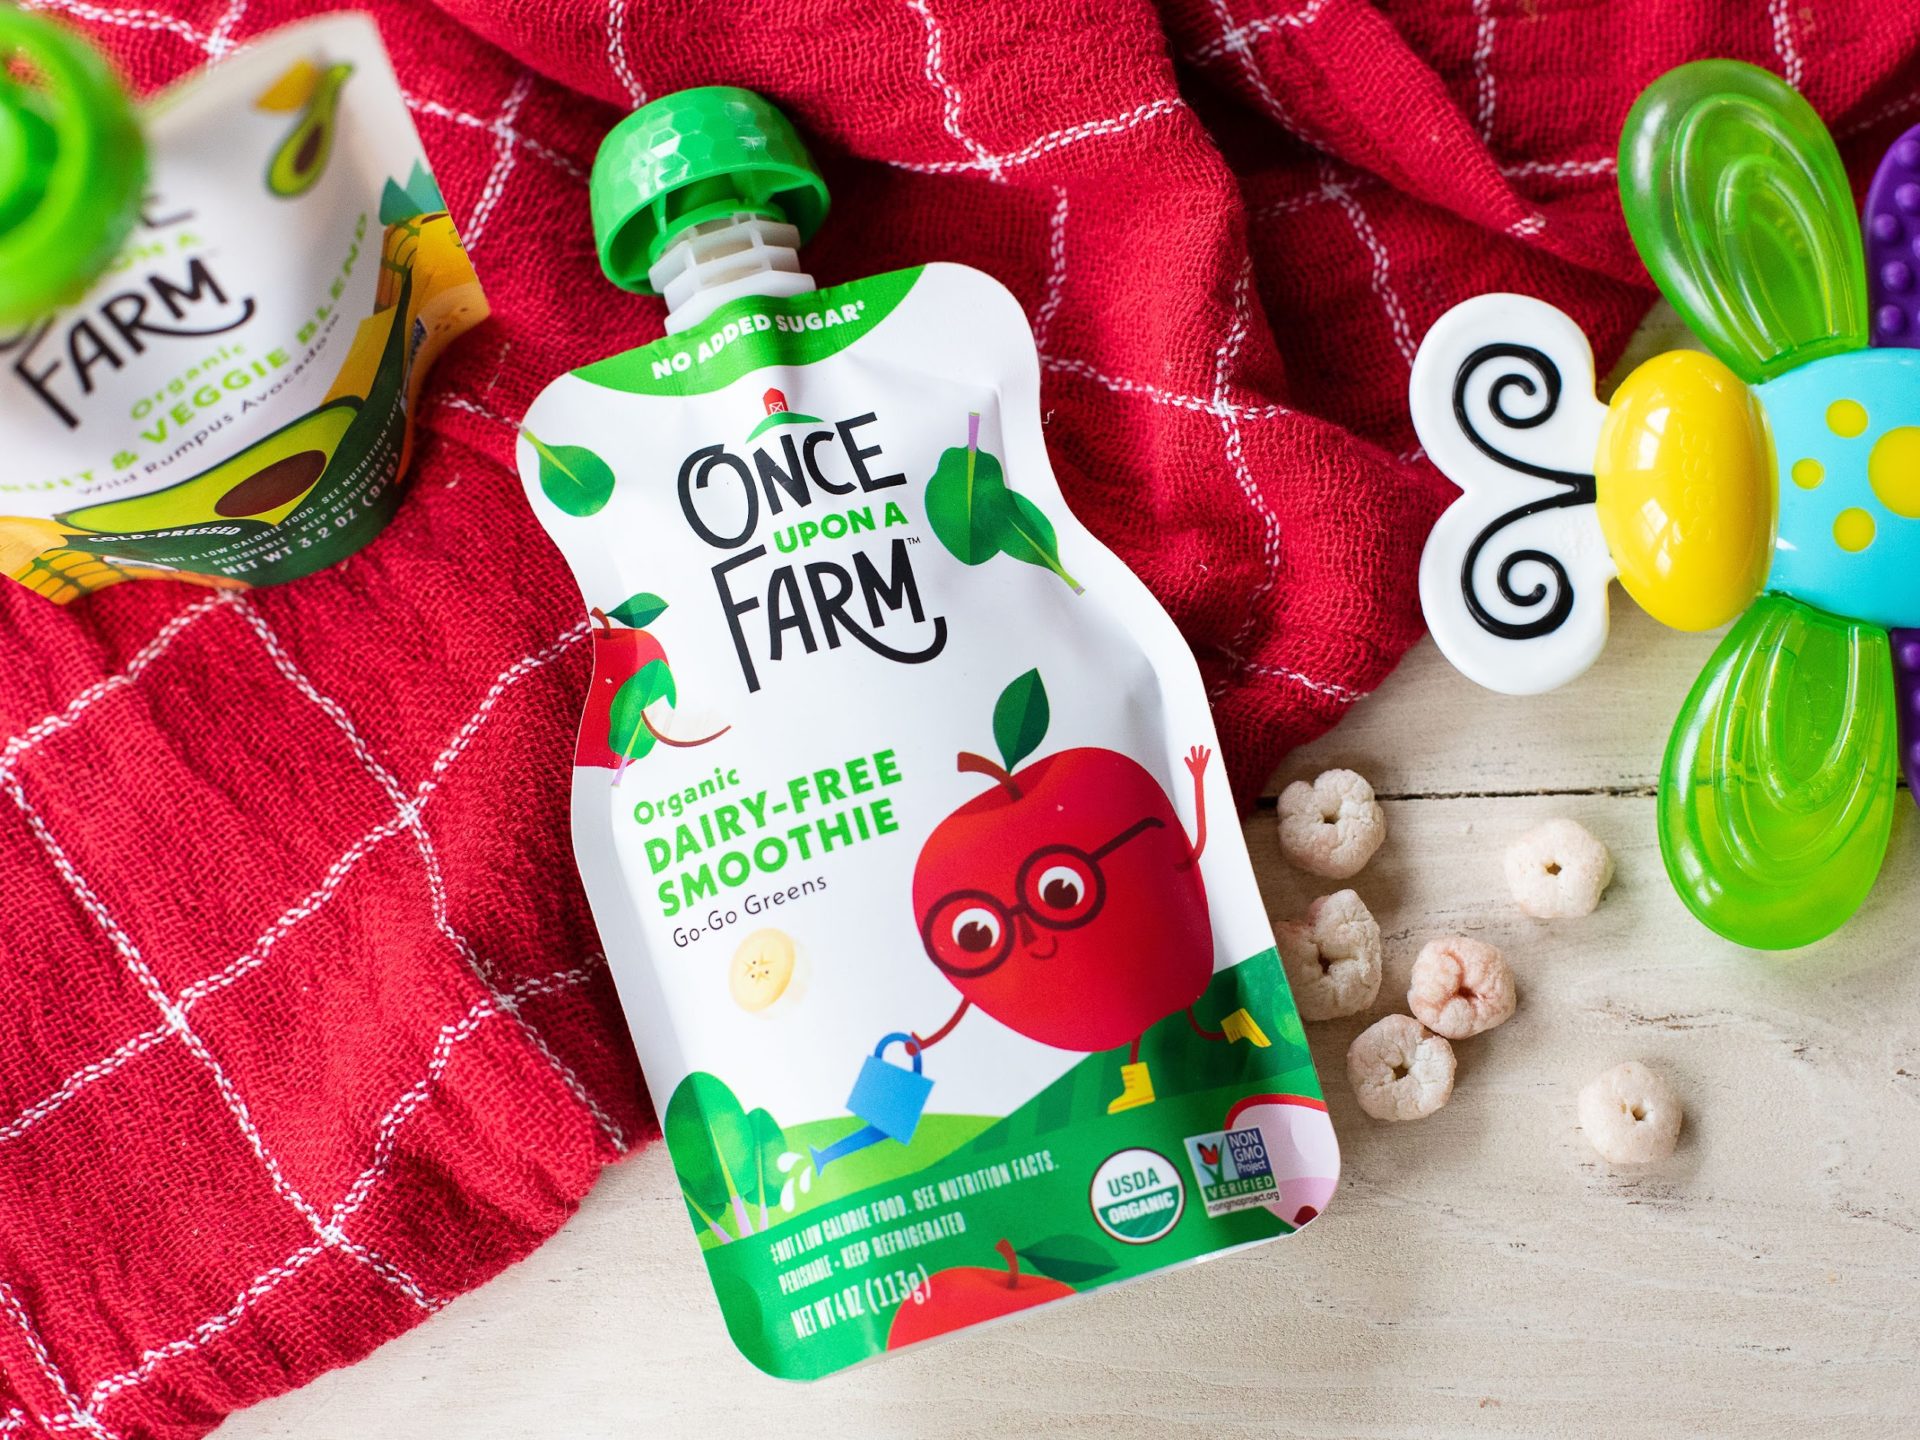 Once Upon A Farm Organic Fruit & Veggie Blend Pouches As Low As $1.29 At Kroger (Regular Price $2.99)